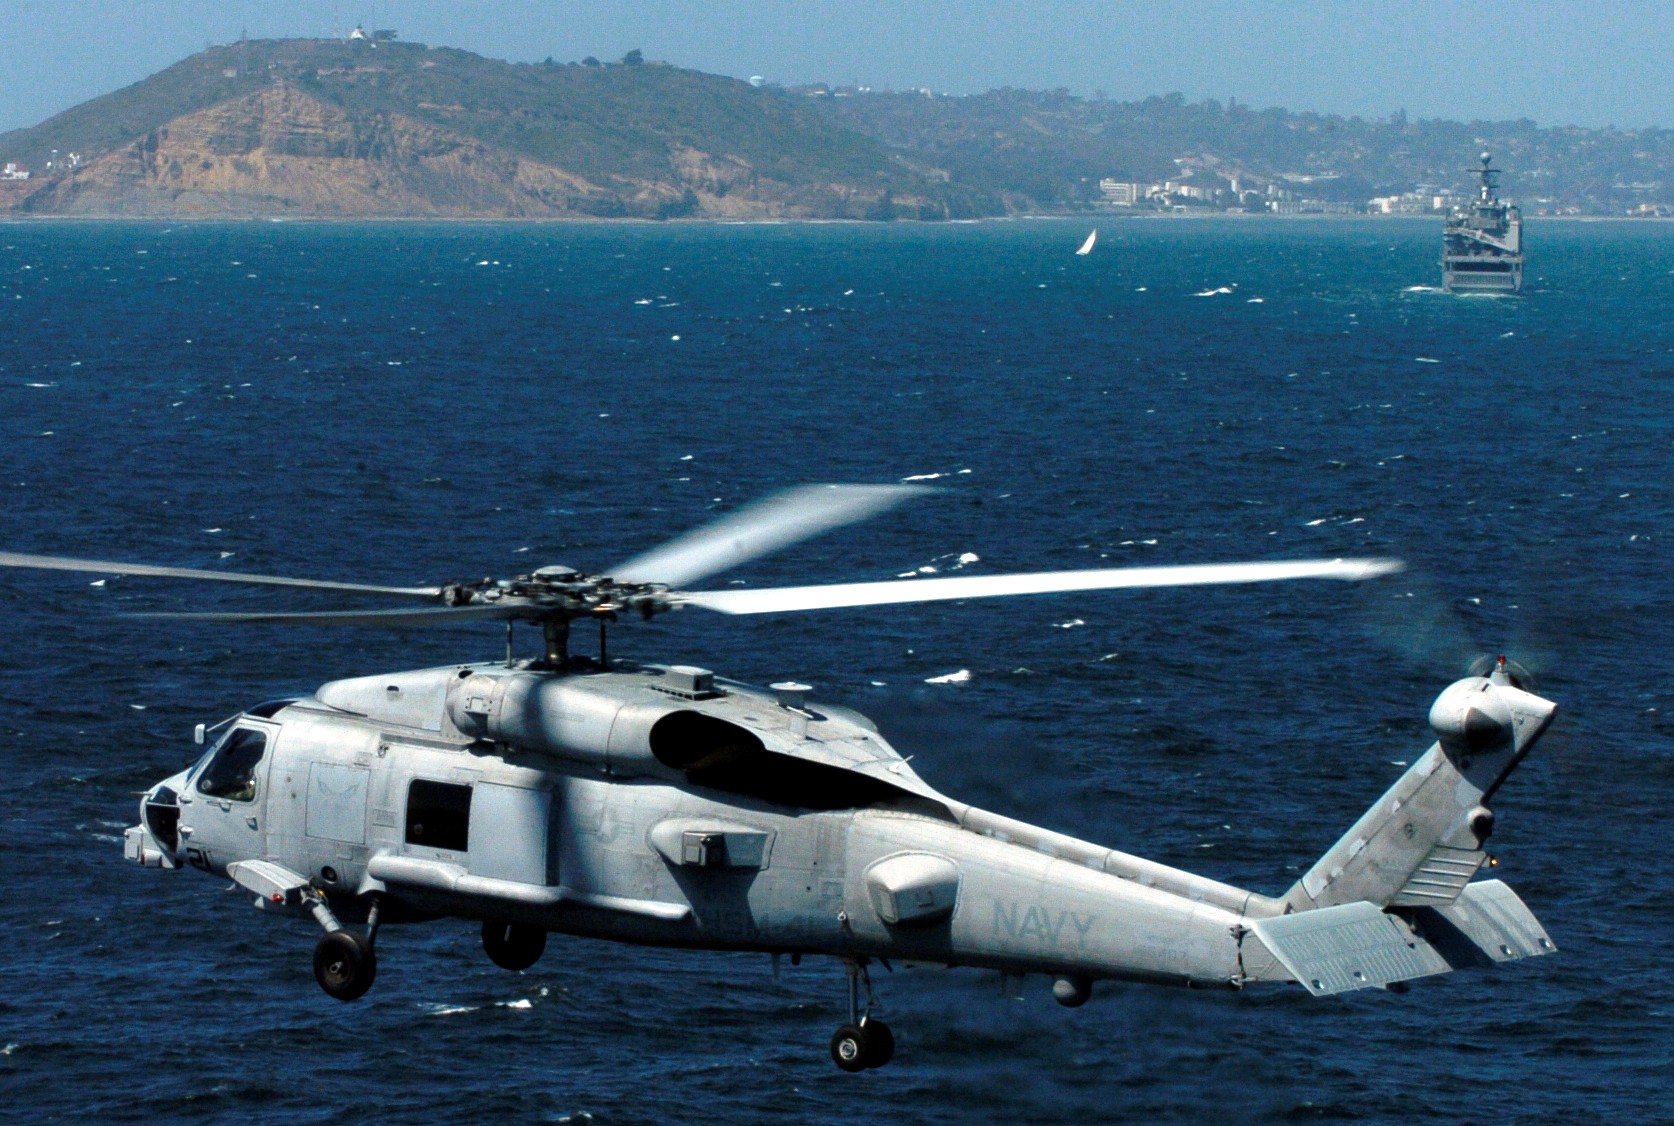 hsm-41 seahawks helicopter maritime strike squadron mh-60r fleet replacement navy 2006 10